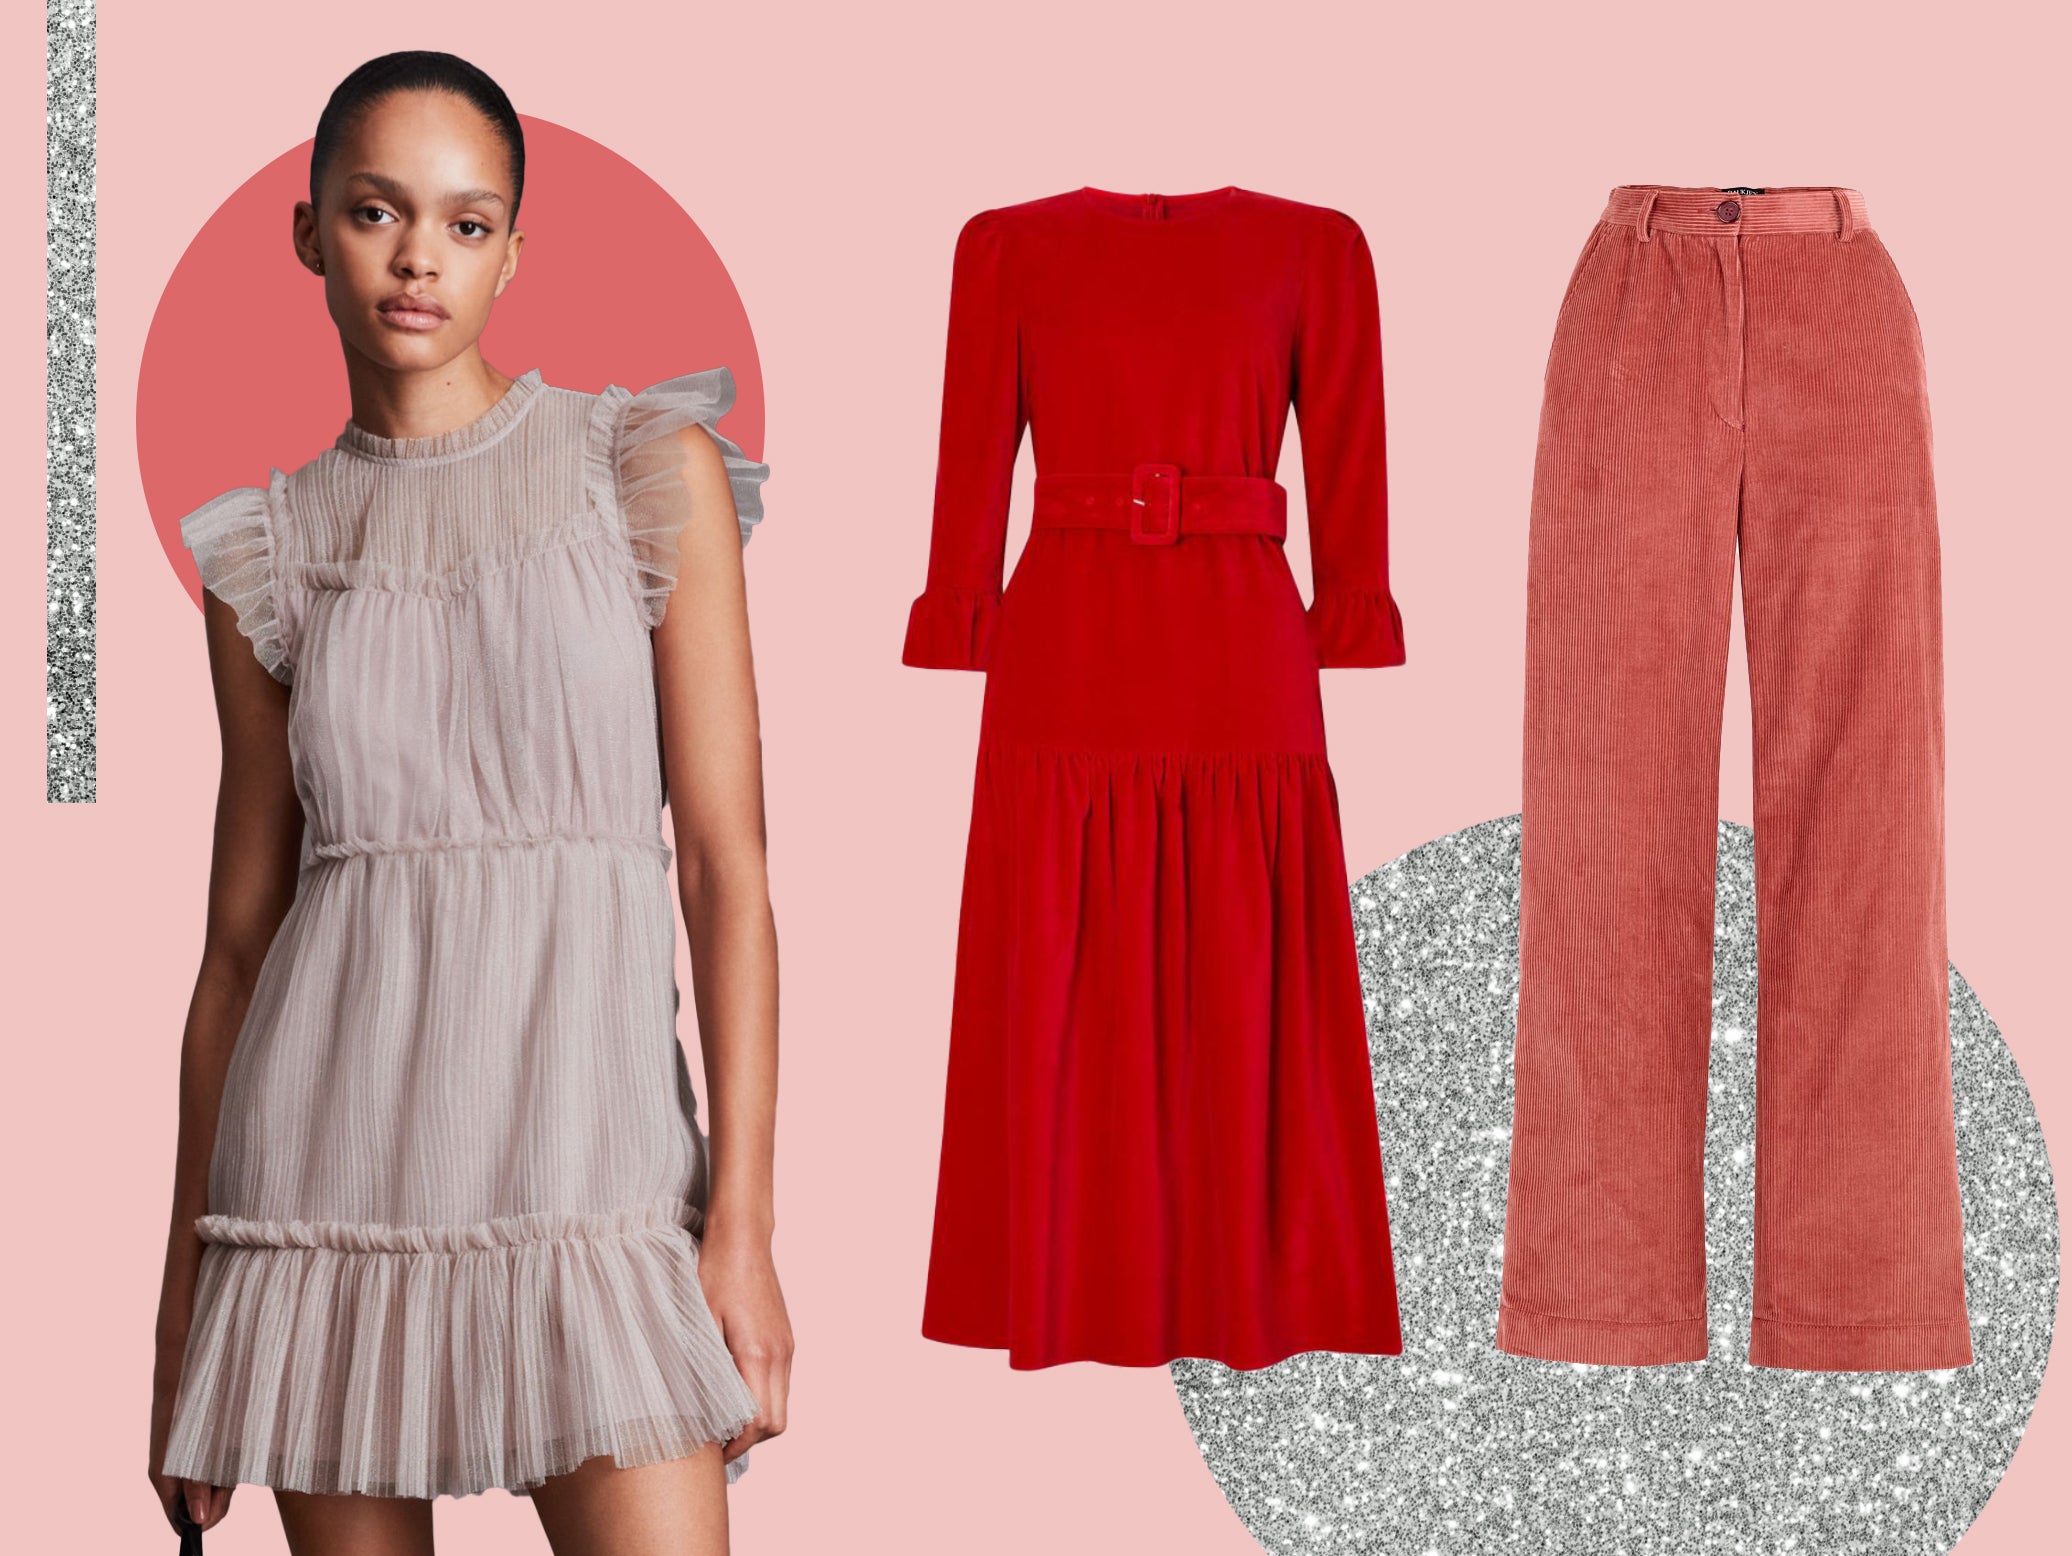 Our team tested a range of ensembles from the high street and beyond